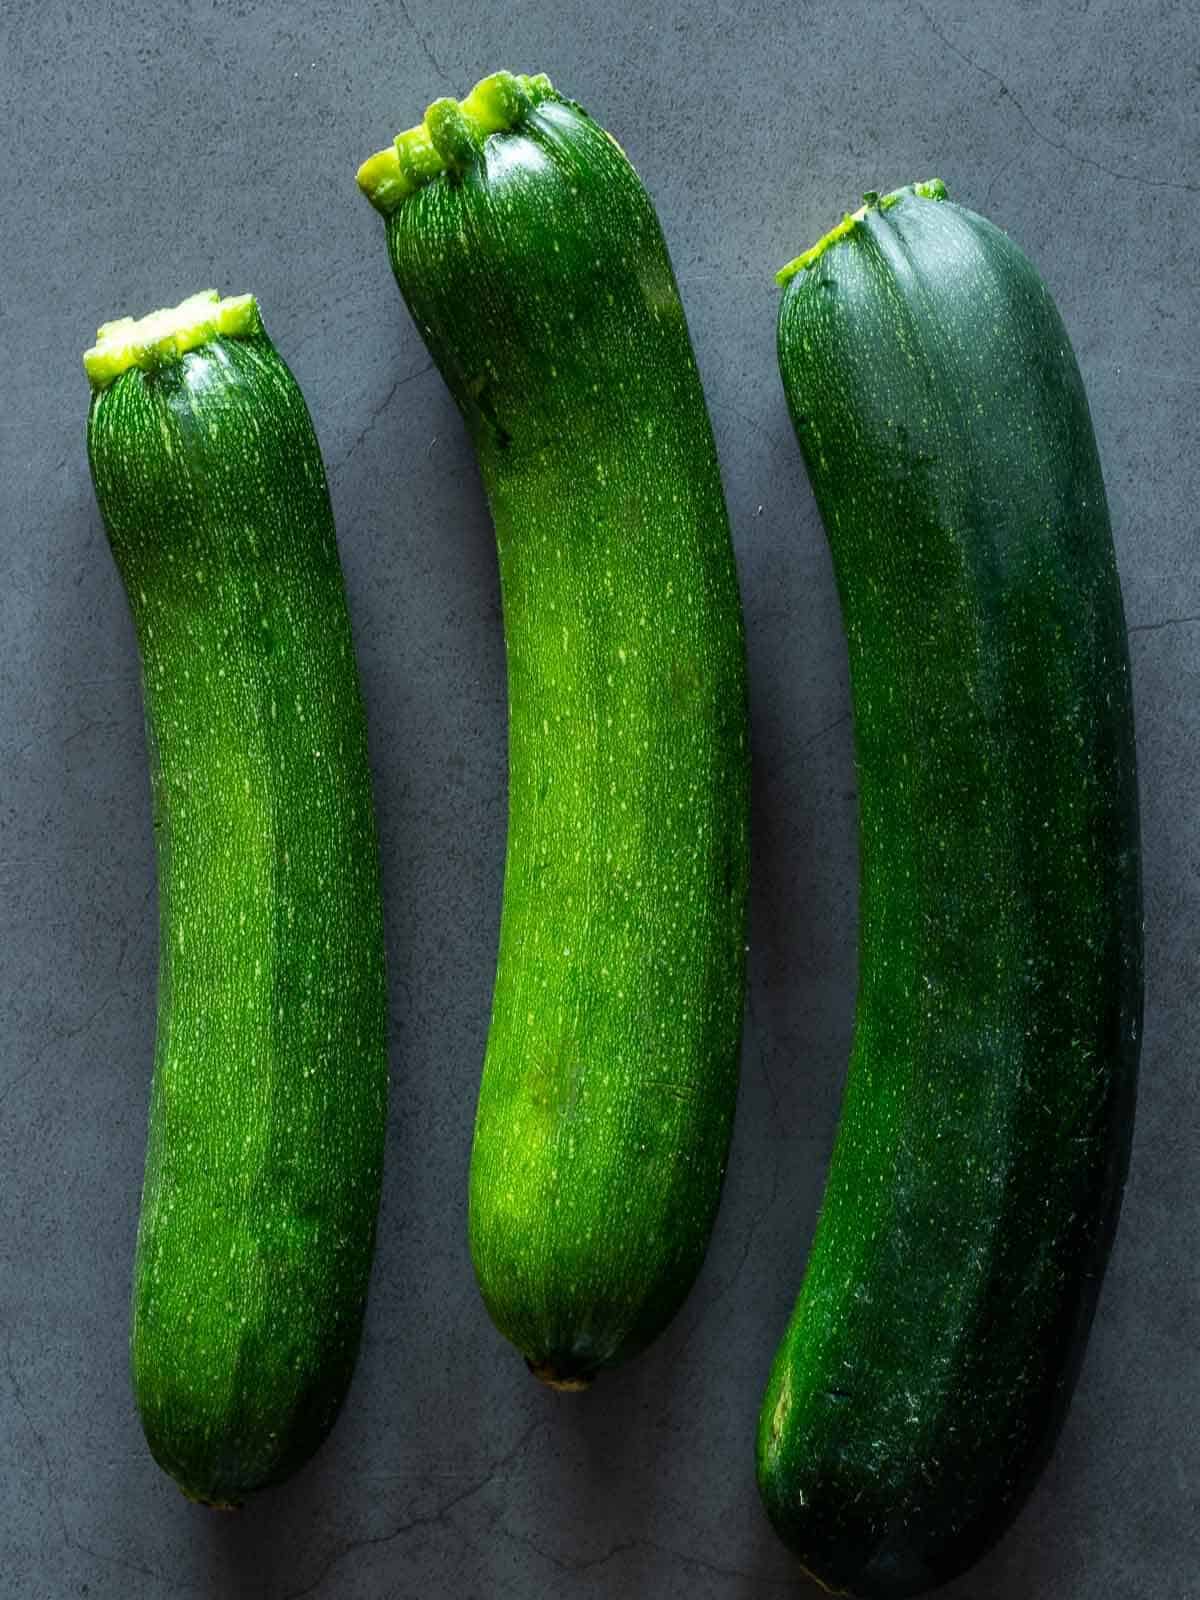 zucchinis or courgette